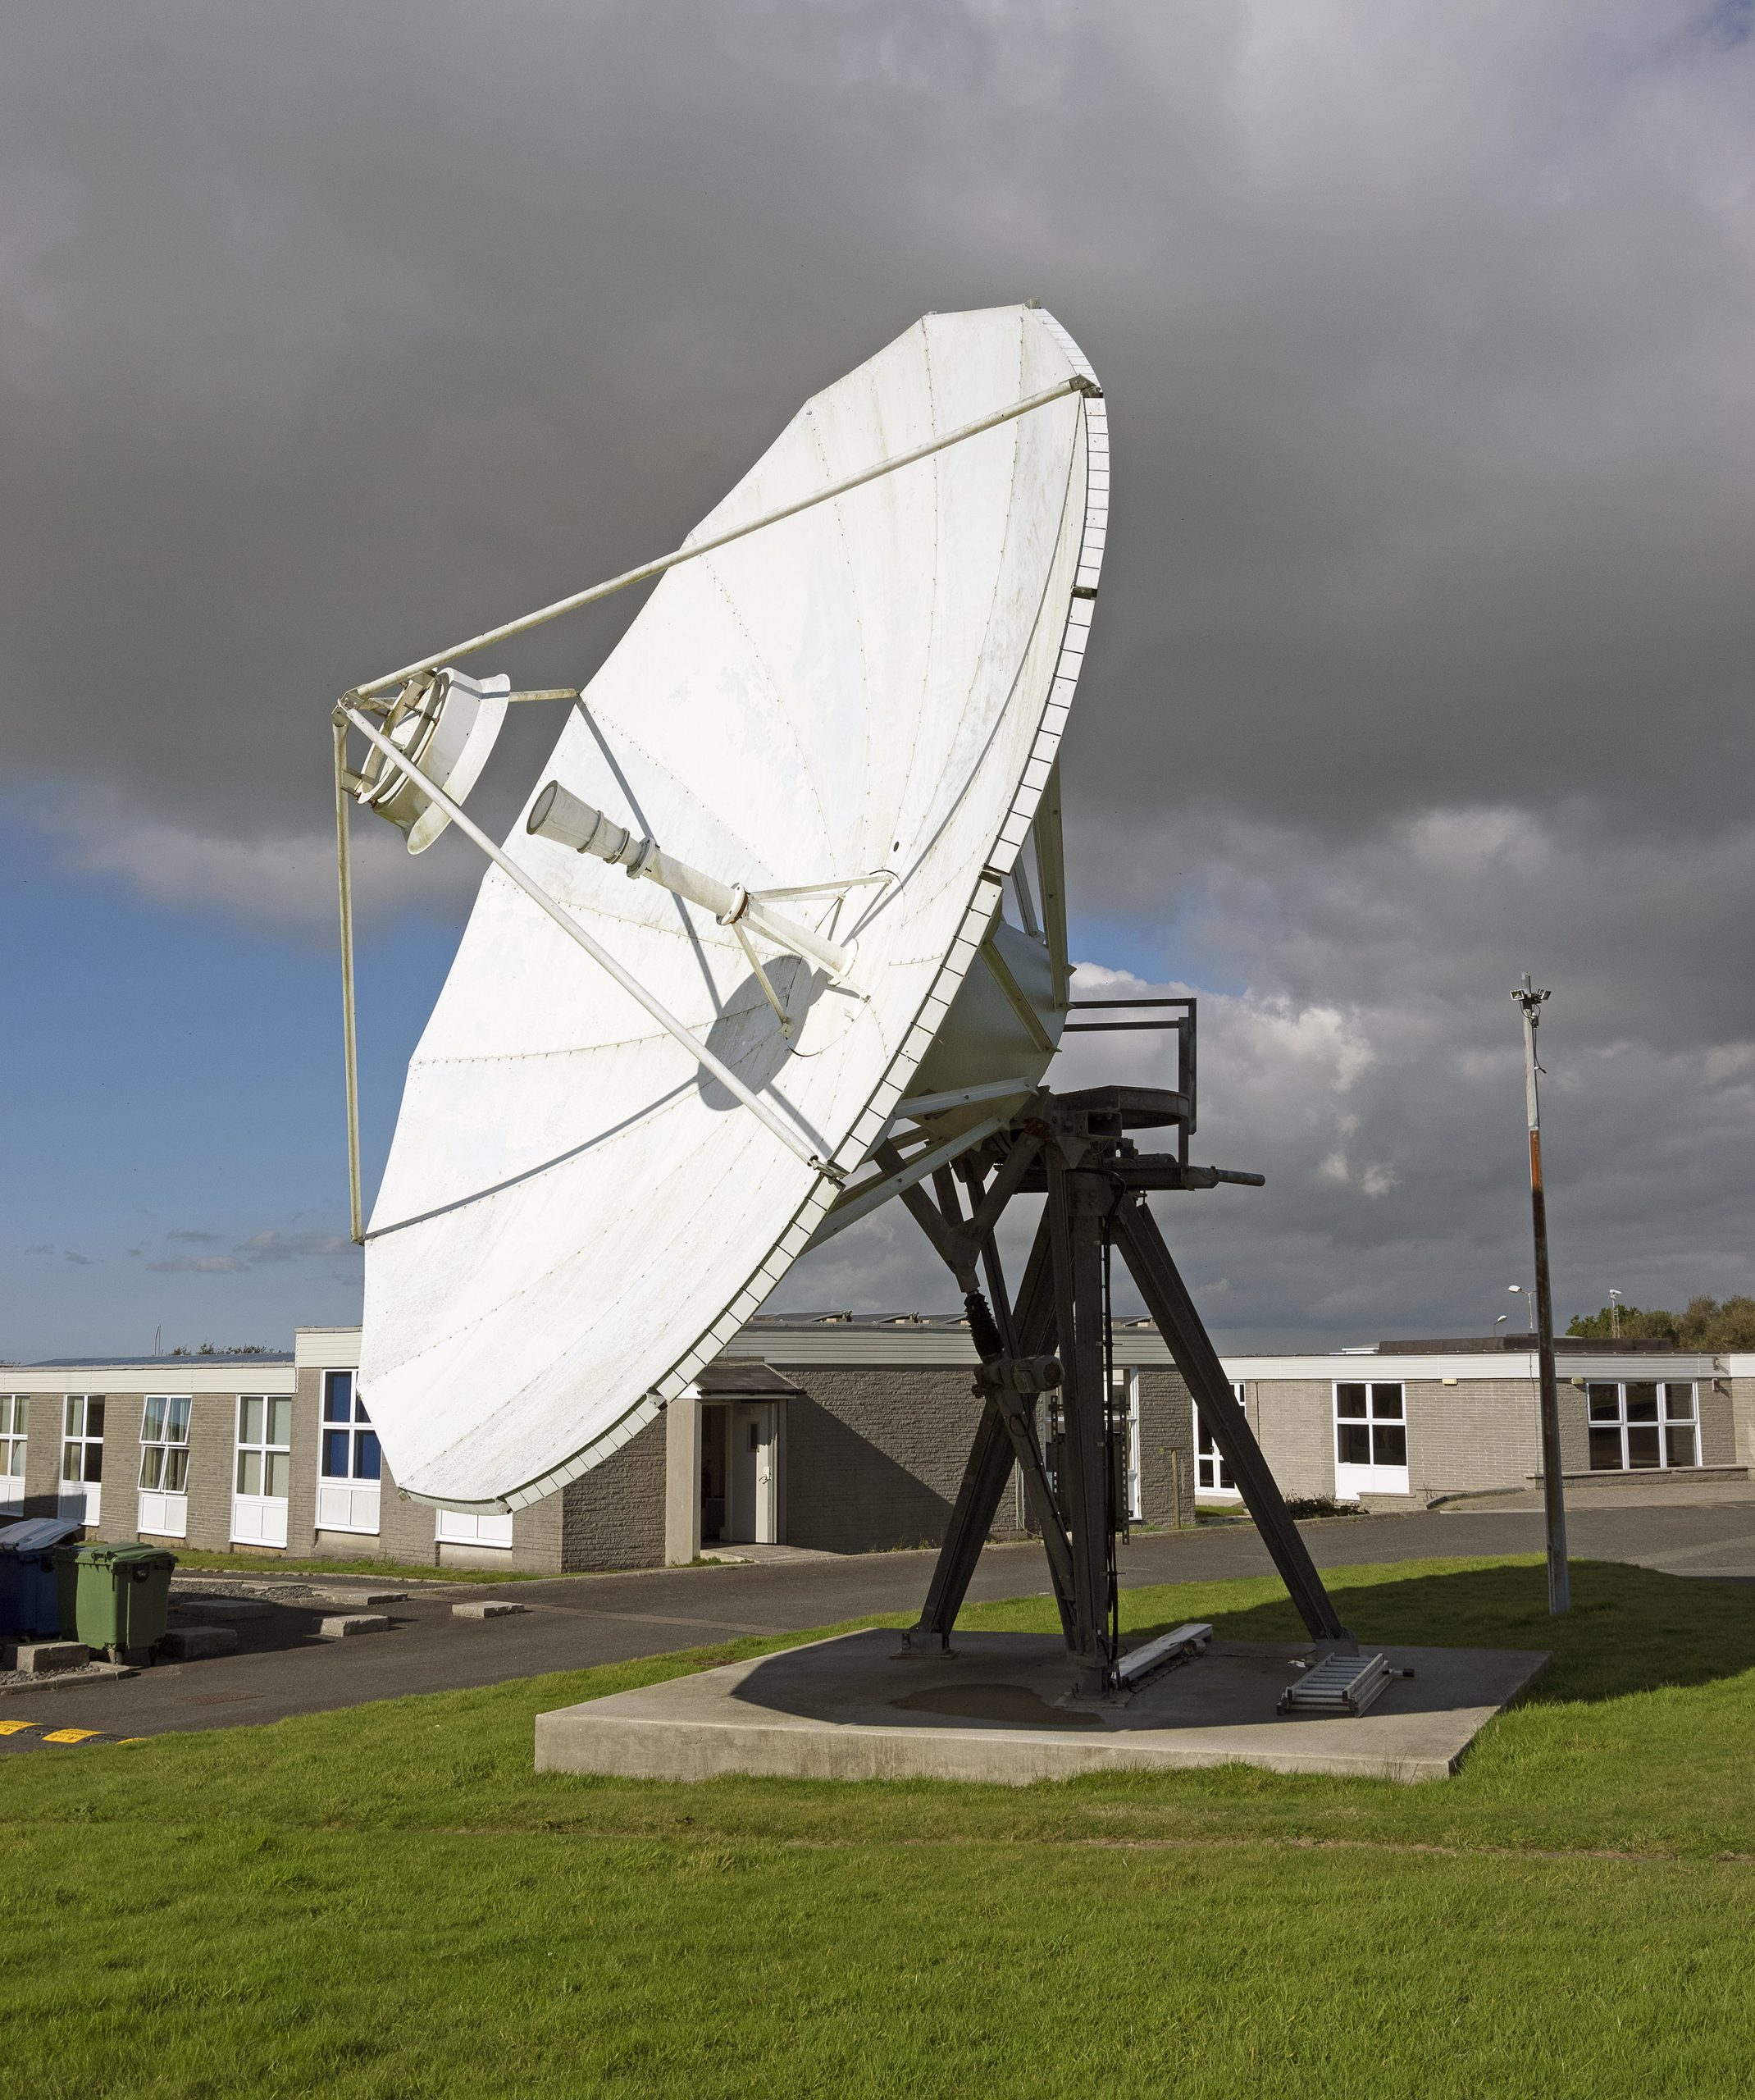 A refurbished Andrew 7.3m Antenna was delivered to Goonhilly Earth Station in the UK in May 2017.